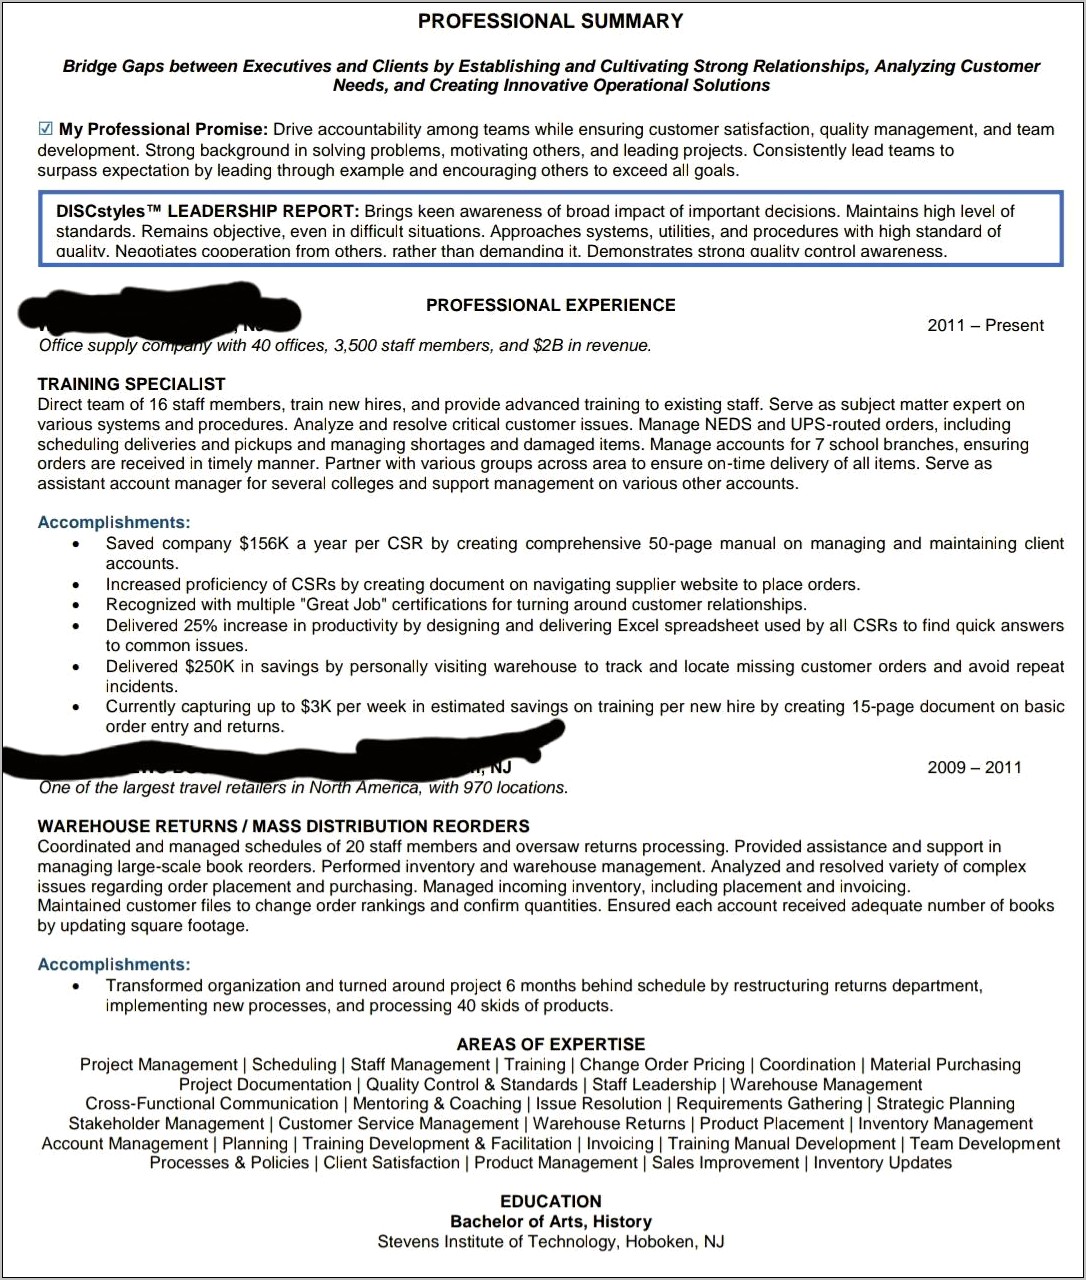 Resume Jobs Are Not In Order